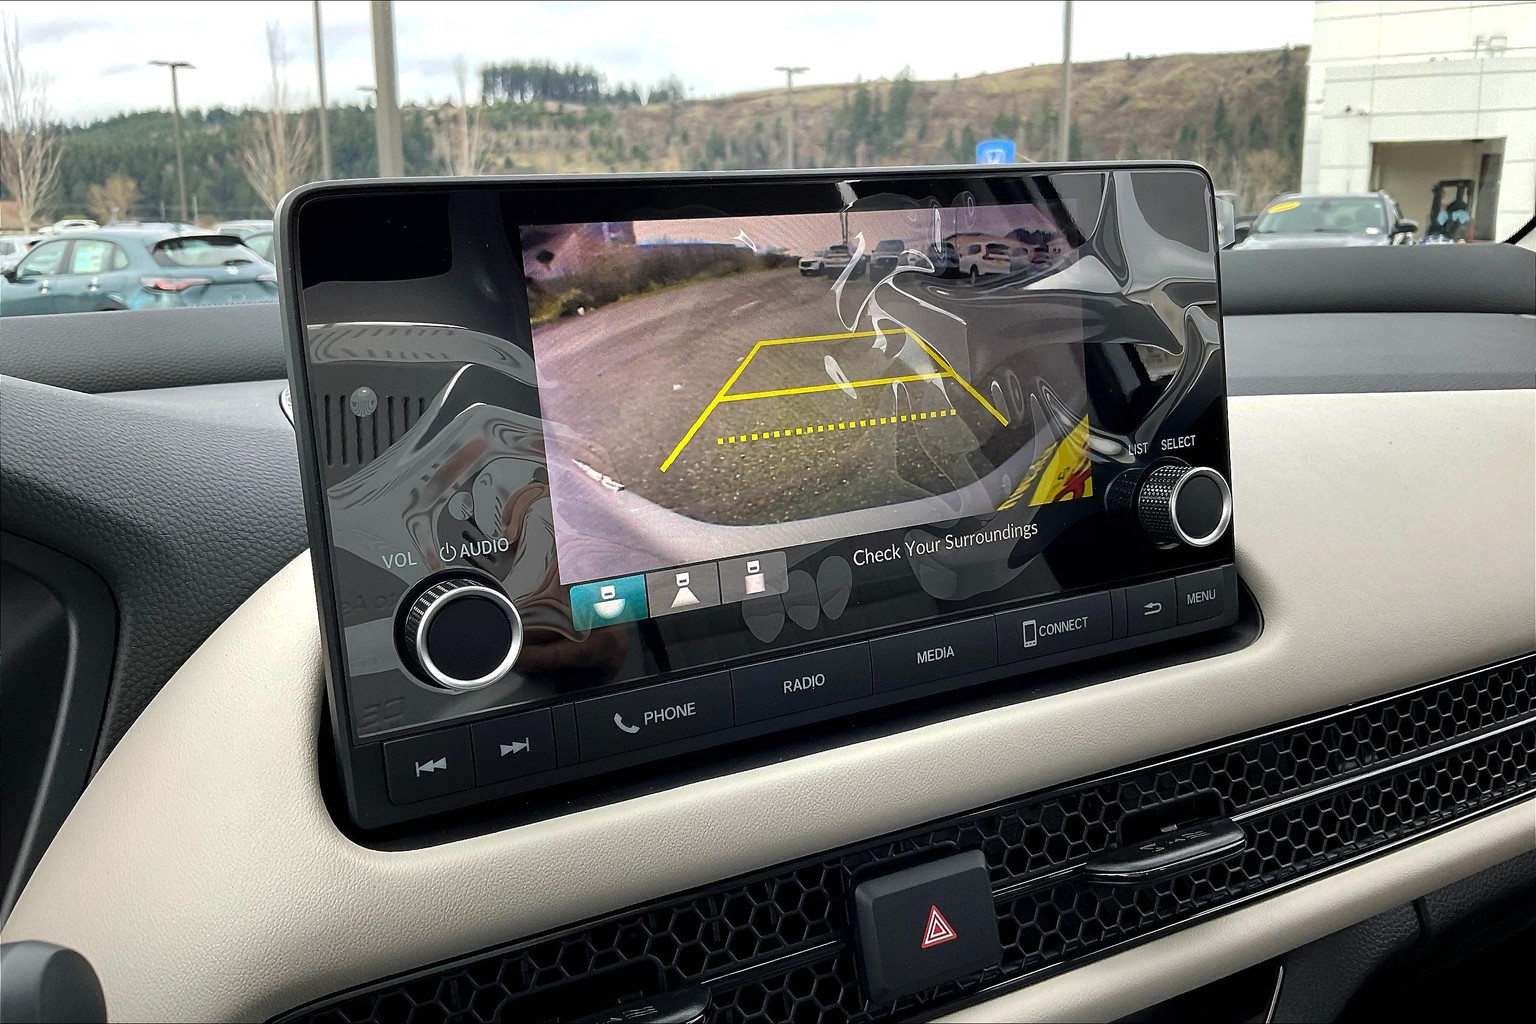 5 car radio/navigation with connection for rear view camera